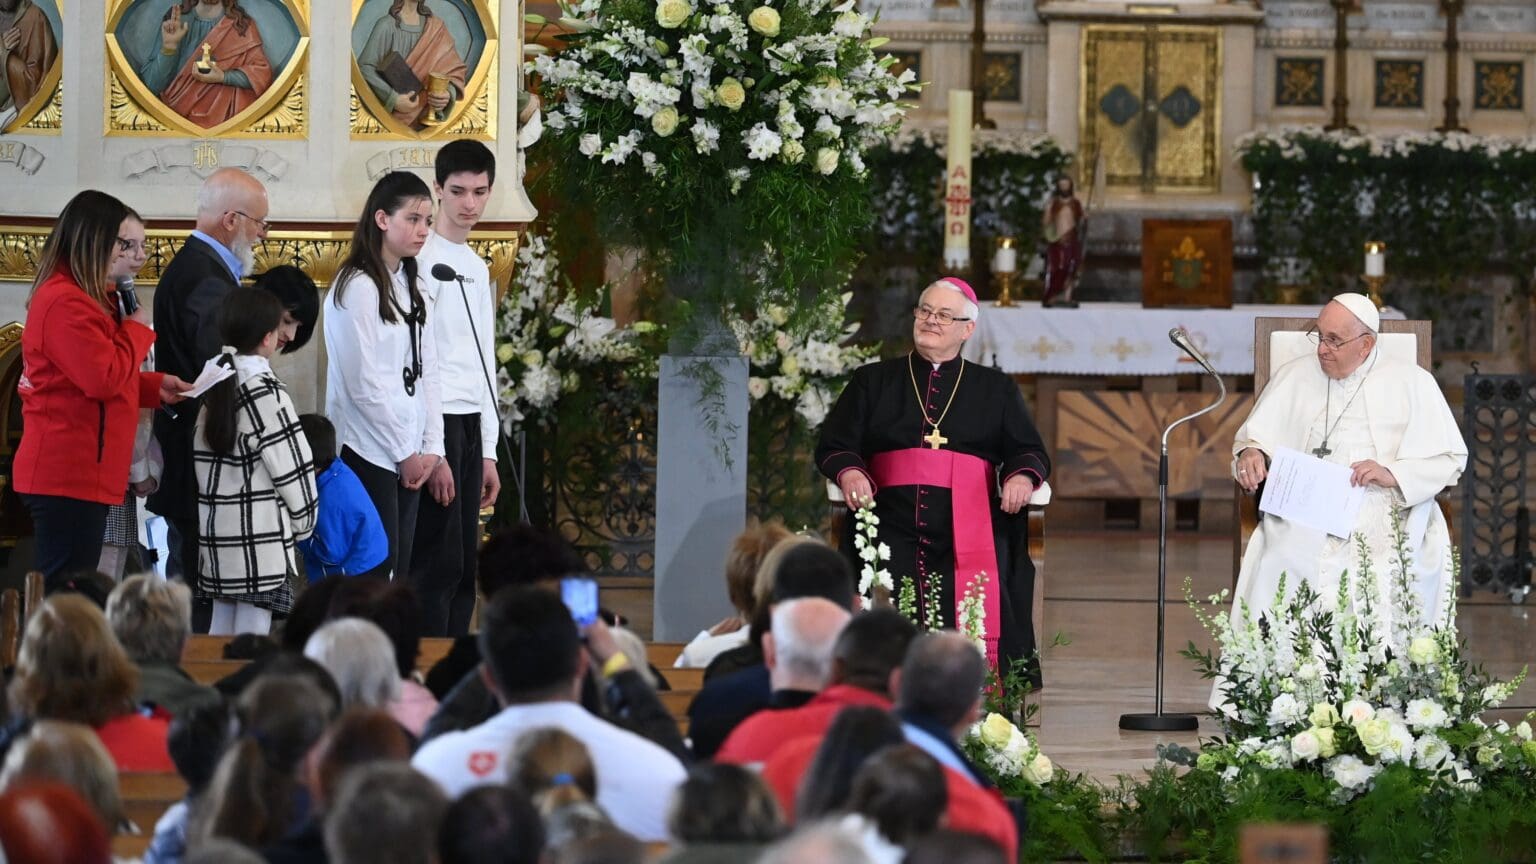 Pope Francis Highlights Importance of Charity in Remarks at St Elizabeth’s Church